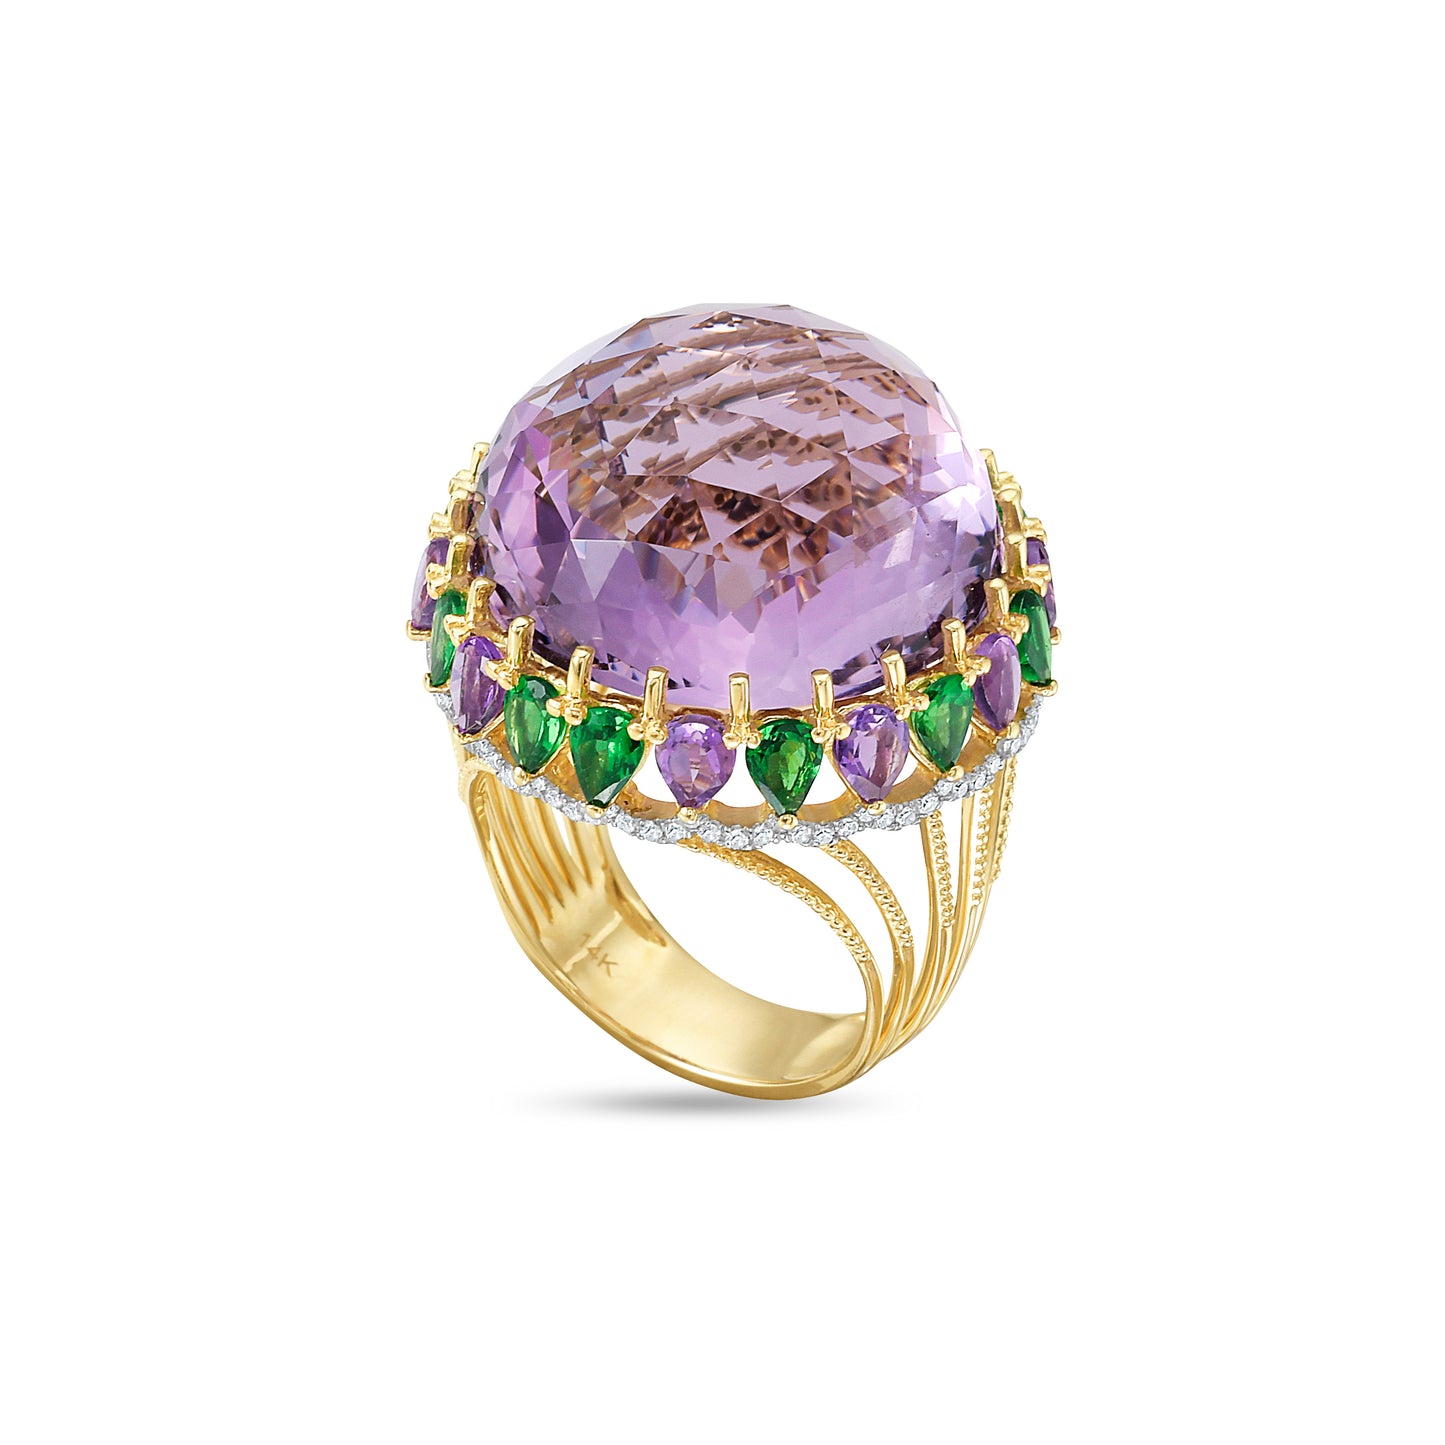 14K CHUNKY COLOR RING SET WITH LARGER CABOCHON, 12 GREEN GARNETS 1.66CT, 1 ROUND AMETHYST 34.85CT, 10 STONES 1.39CT